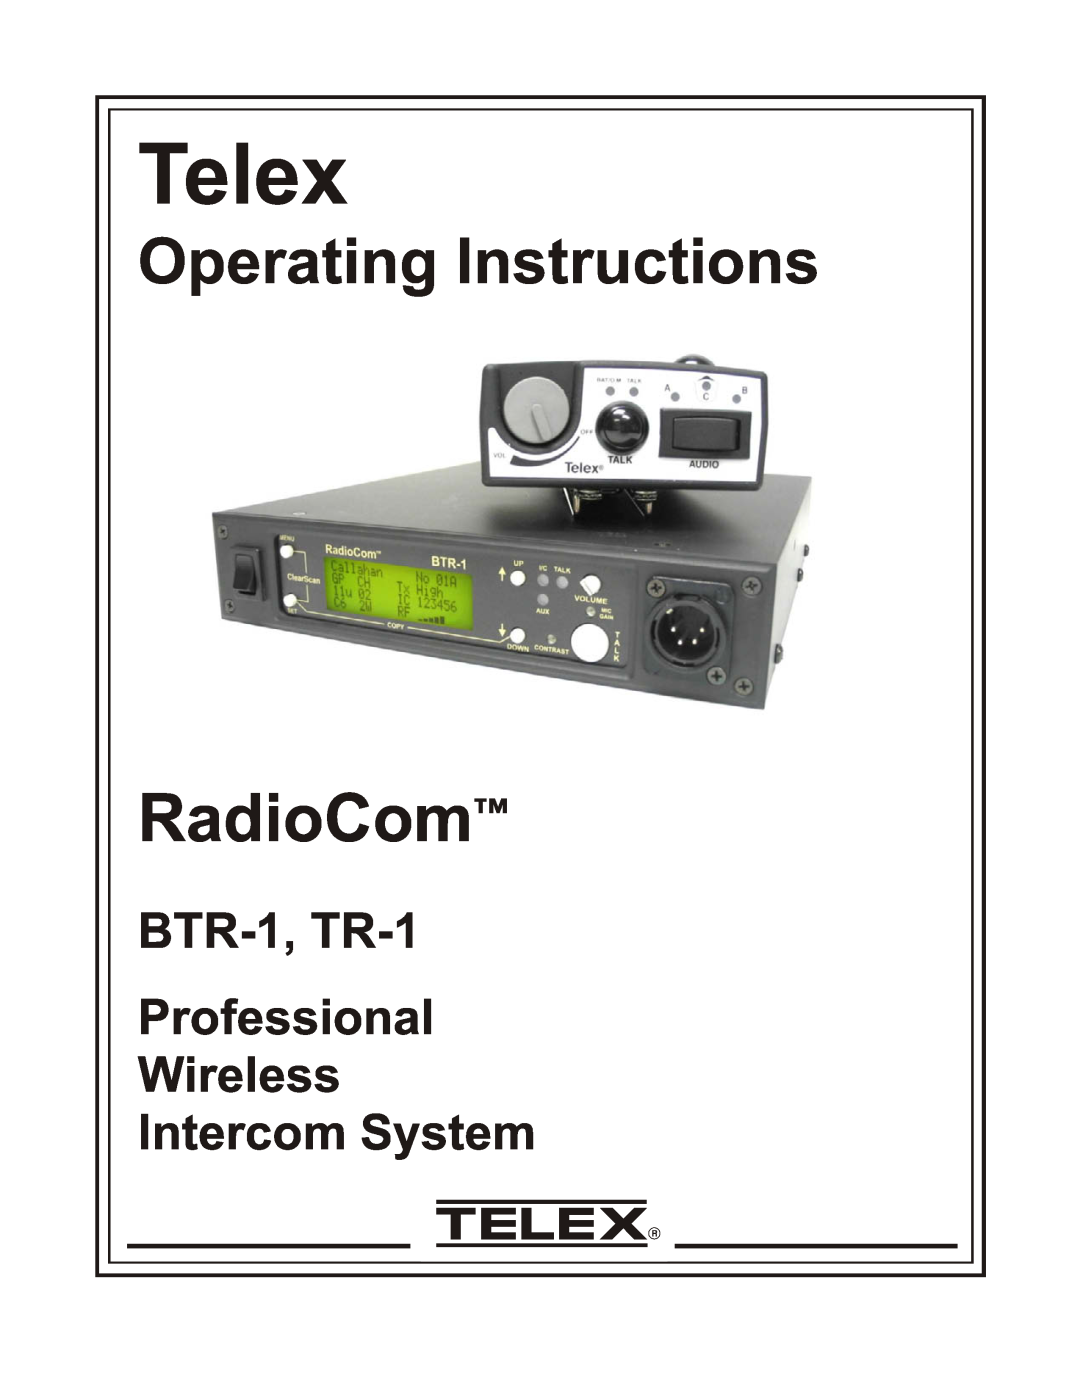 Telex manual BTR-1 & TR-1, UHF-Synthesized Digitally Encrypted Wireless Intercom System, Features, Line Drawing 